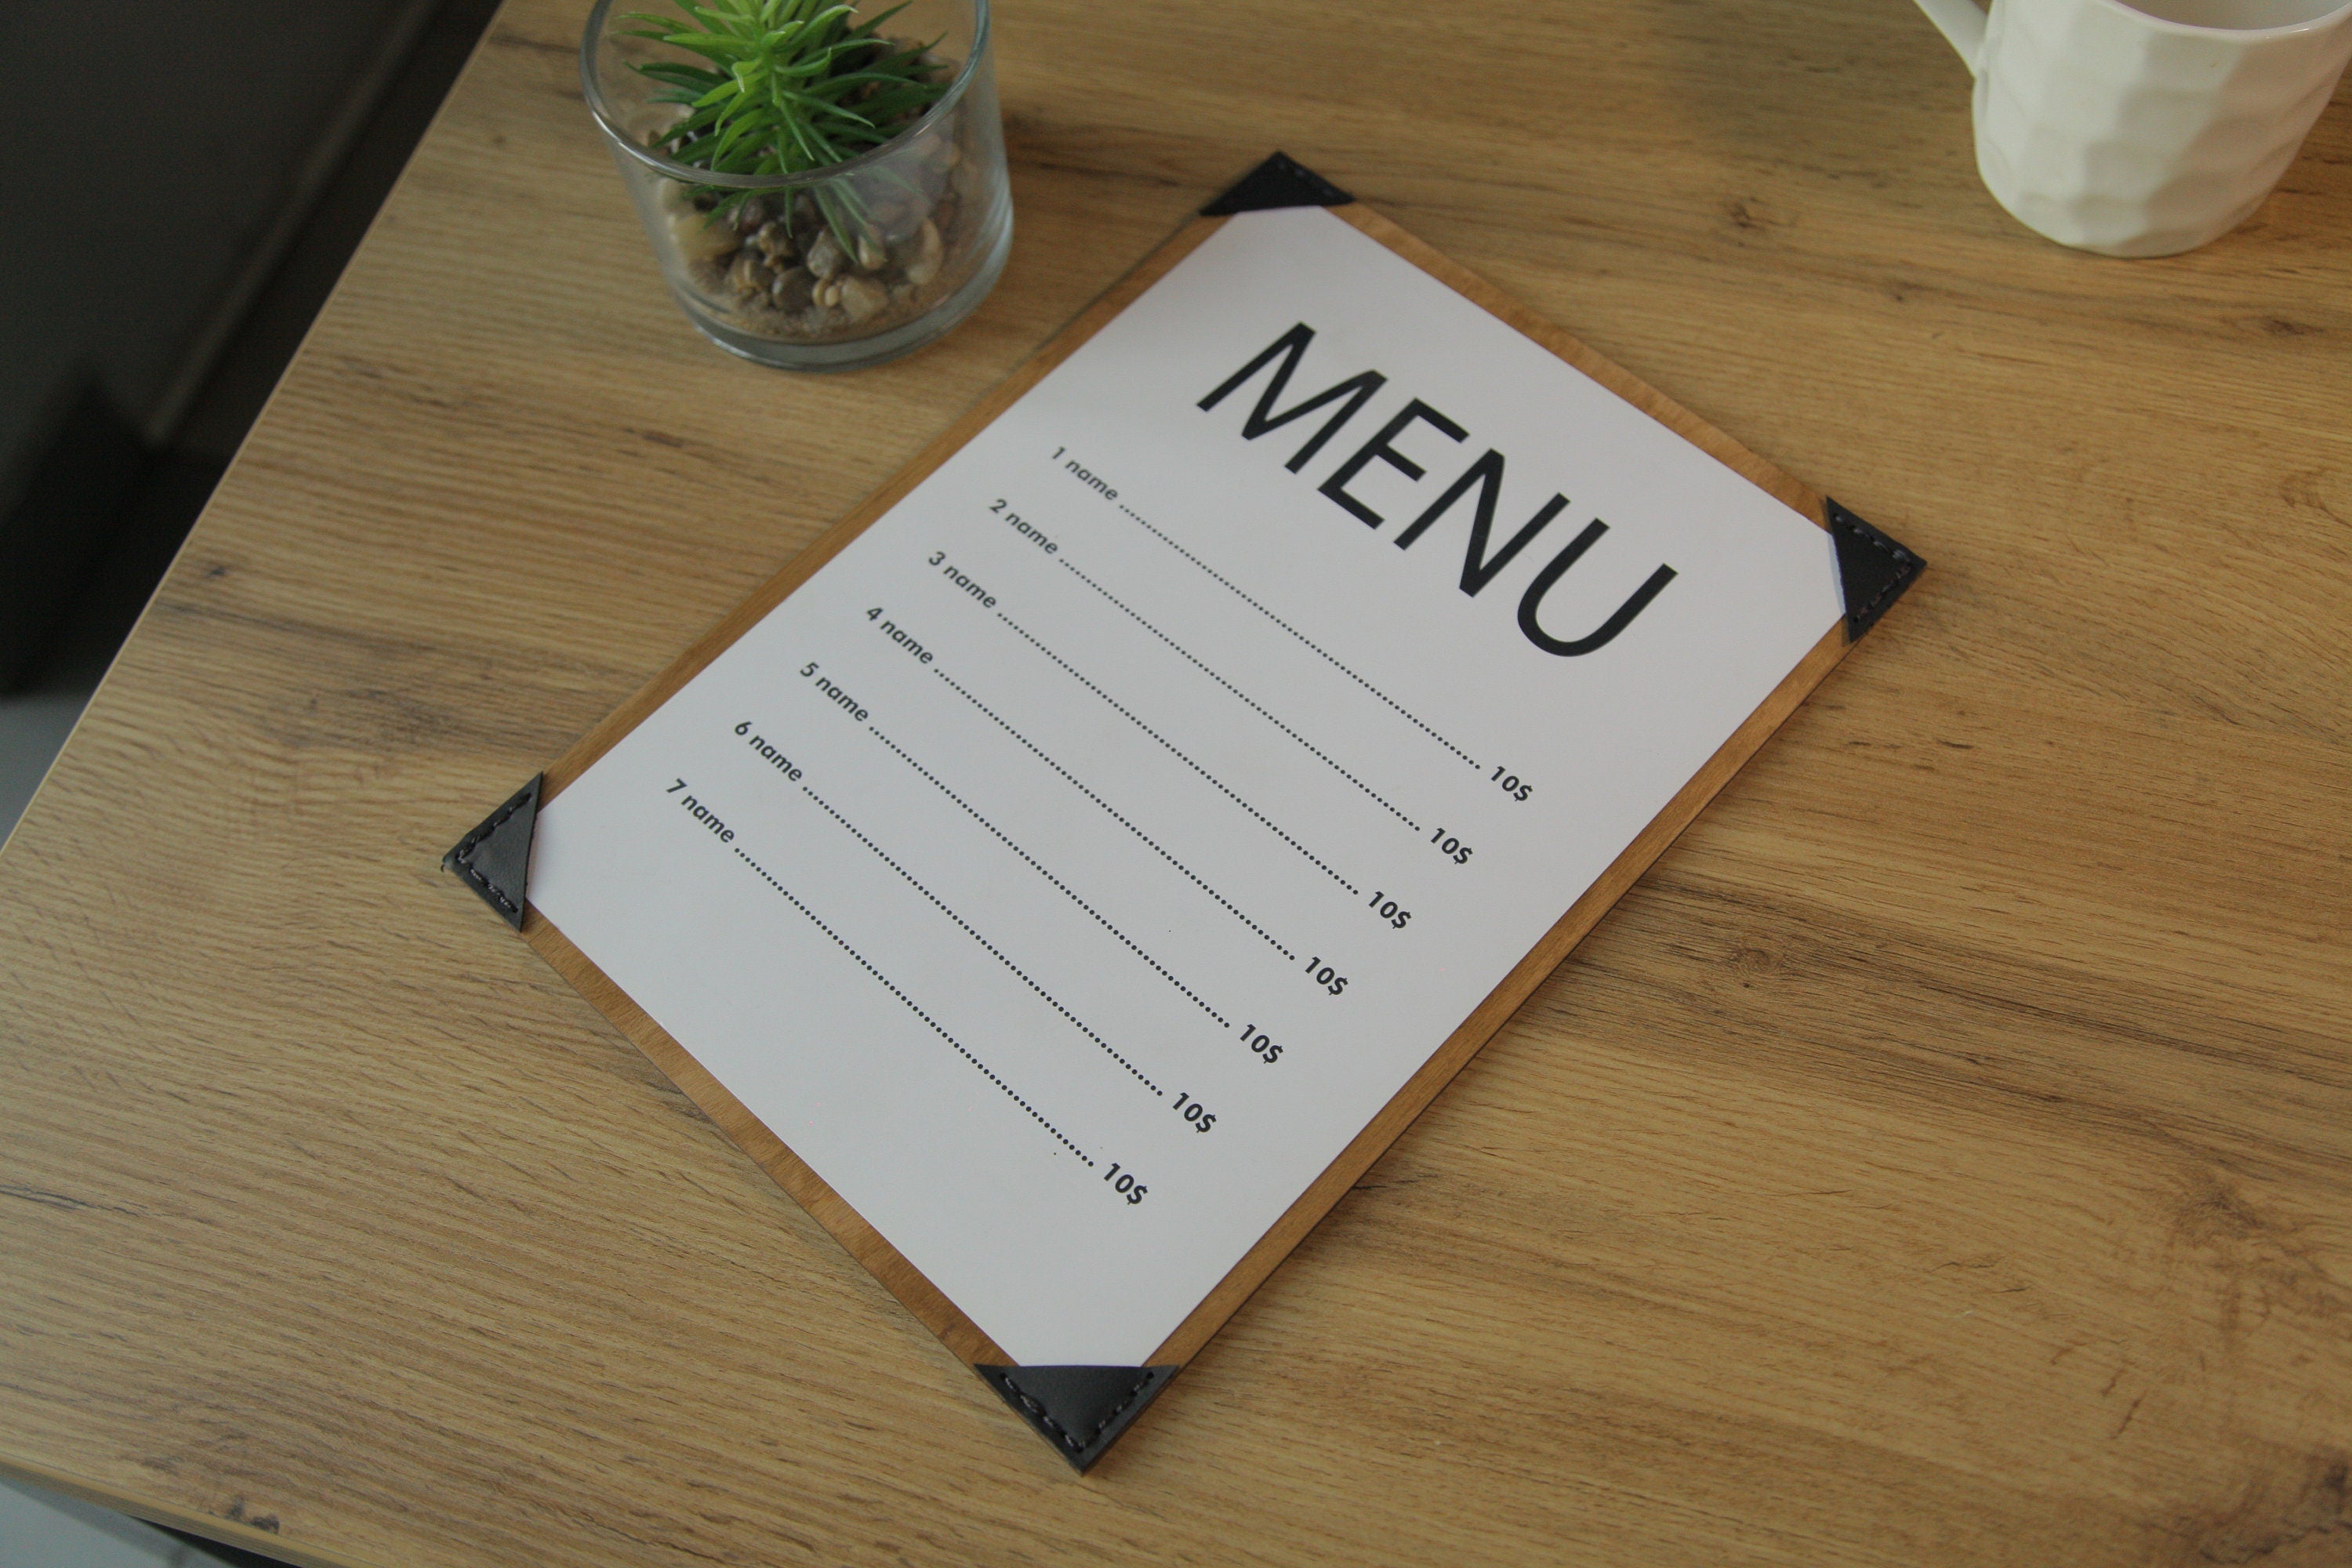 Menu cover - is it worth spending money on convenience and quality?